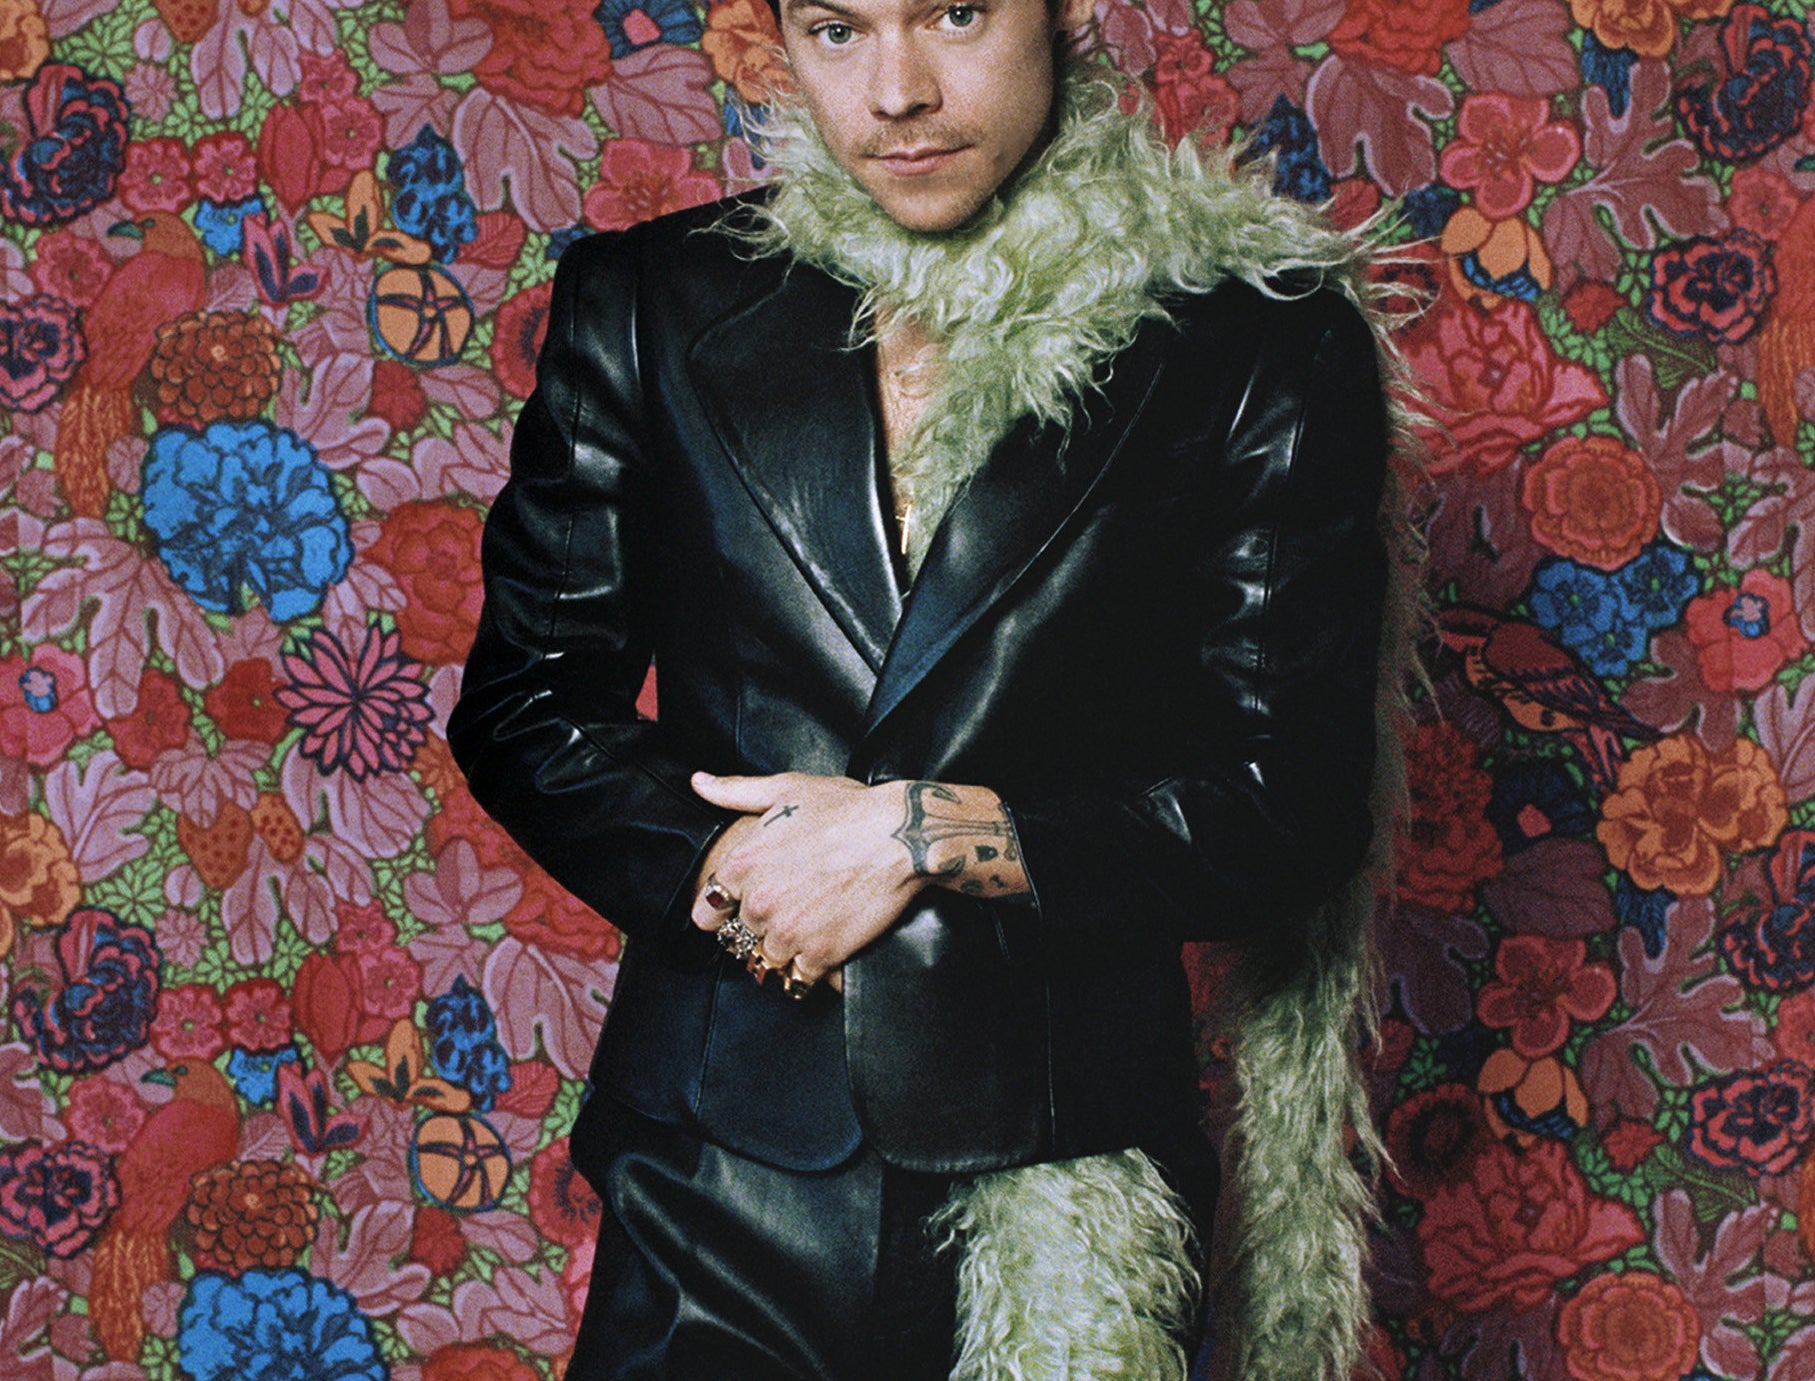 A close-up of Harry against a flowery backdrop